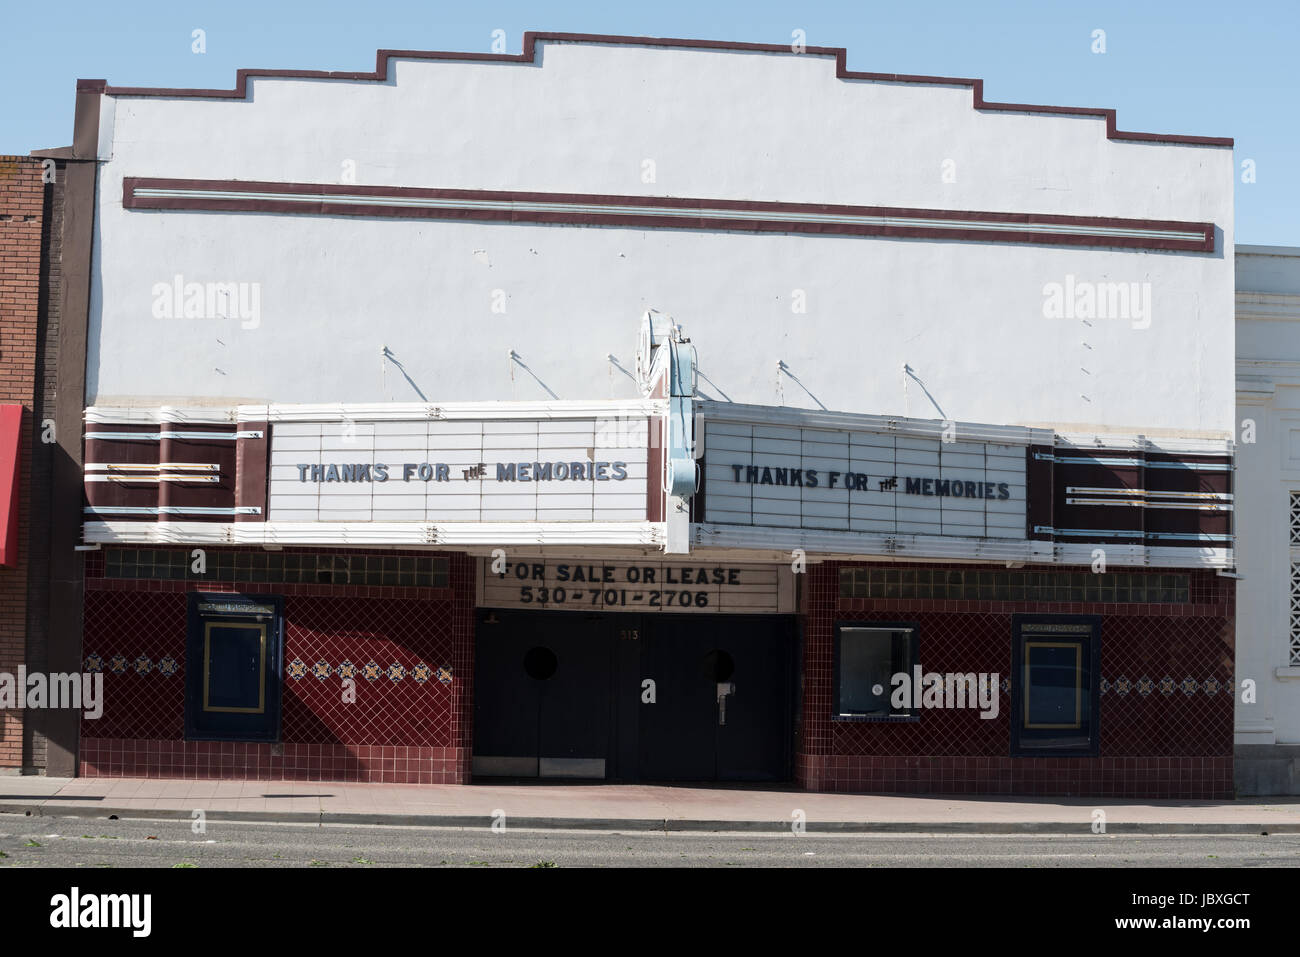 'Thanks for the memories' on the marquee of the closed Colusa Theatre in Colusa, California. Stock Photo